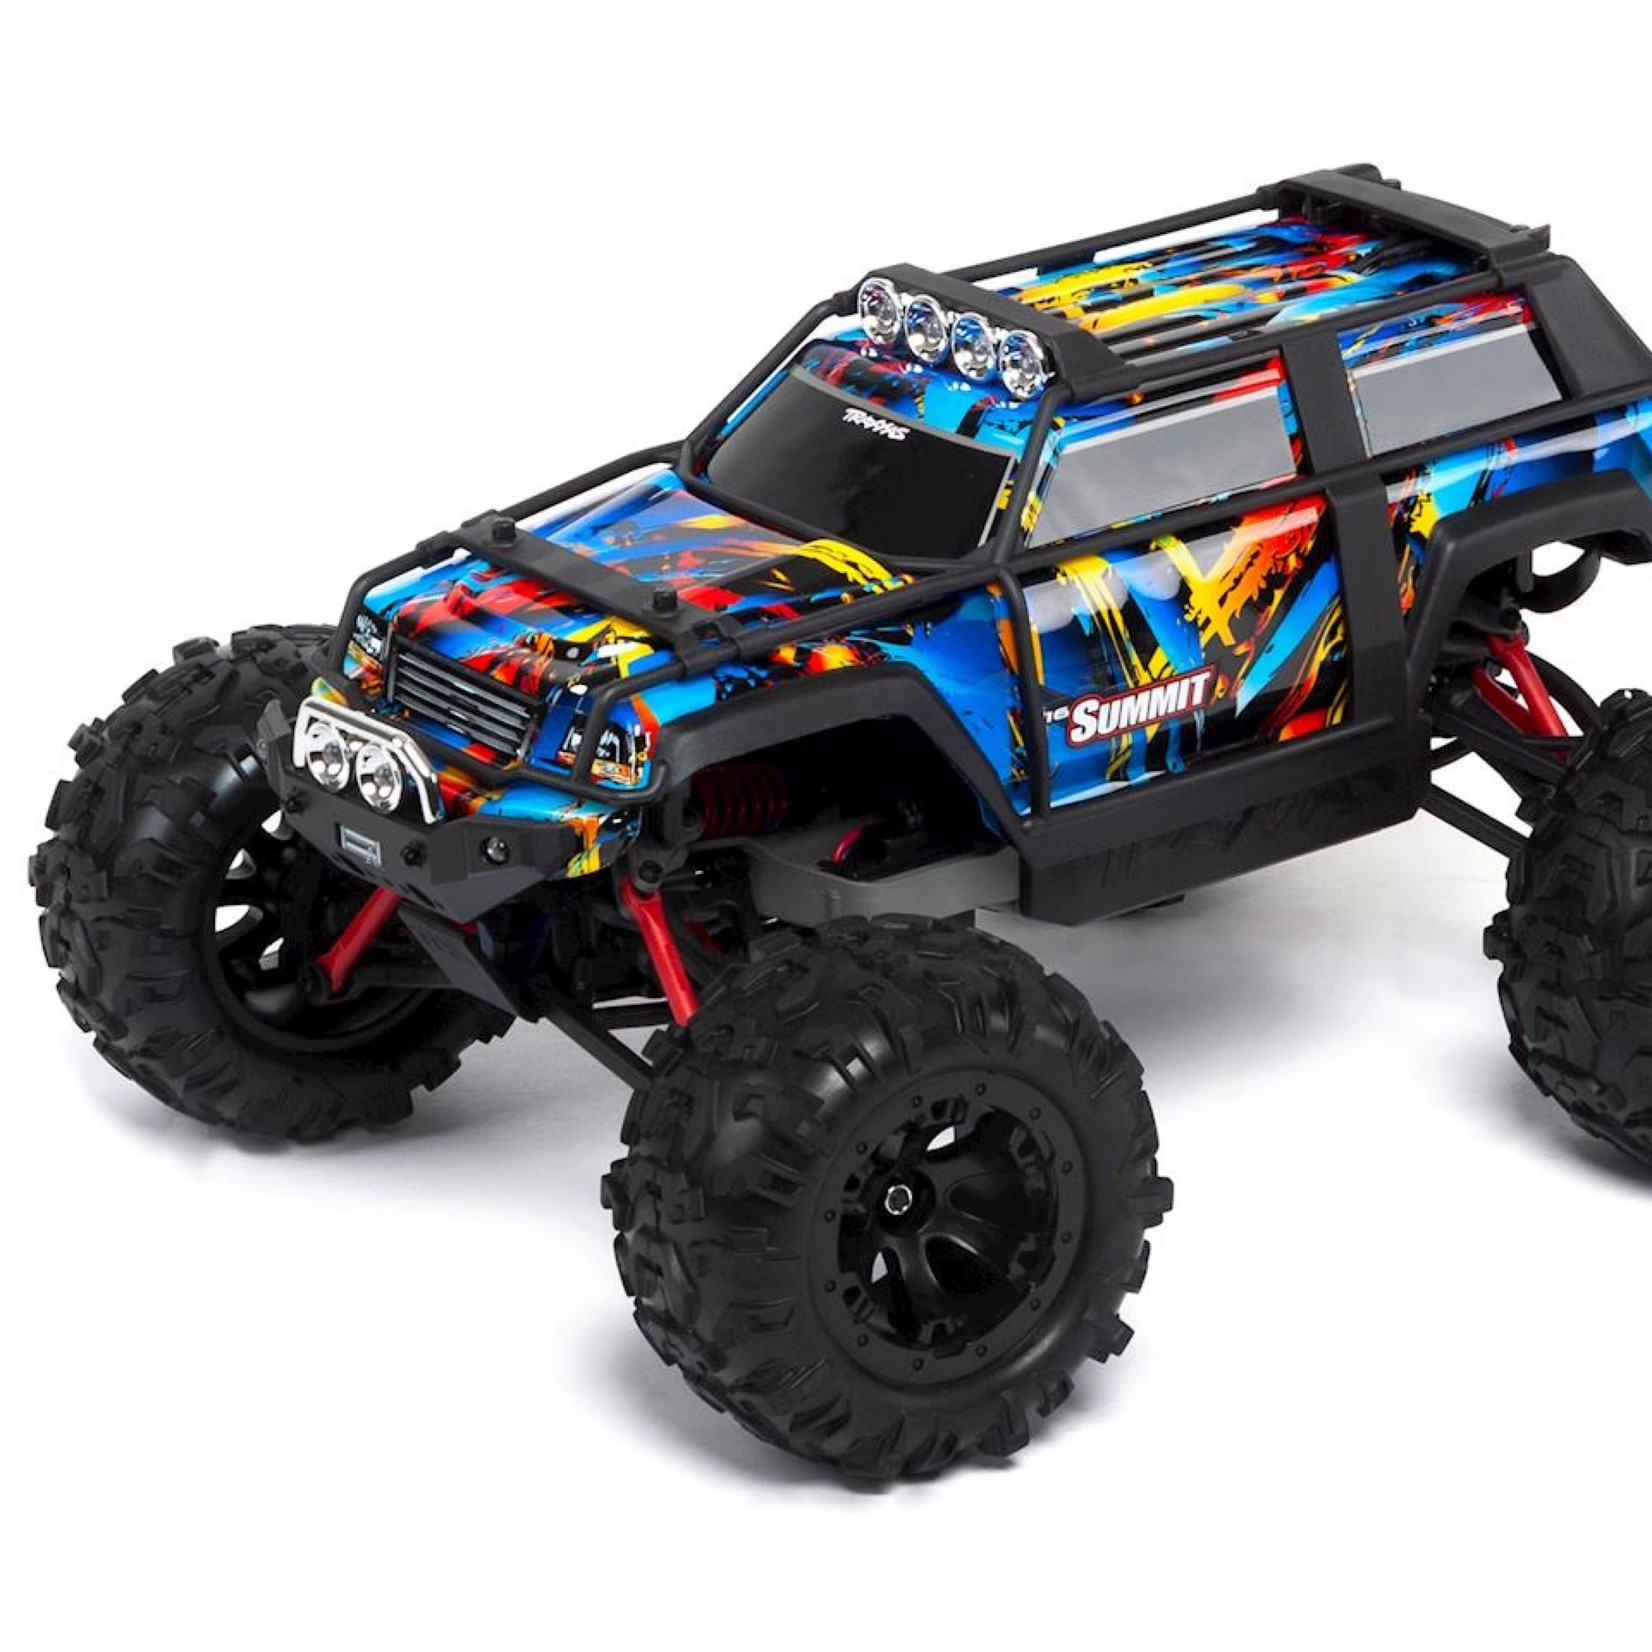 Traxxas Traxxas Summit 1/16 4WD RTR Truck (Rock n Roll) w/TQ Radio, LED Lights, Battery & Charger #72054-5